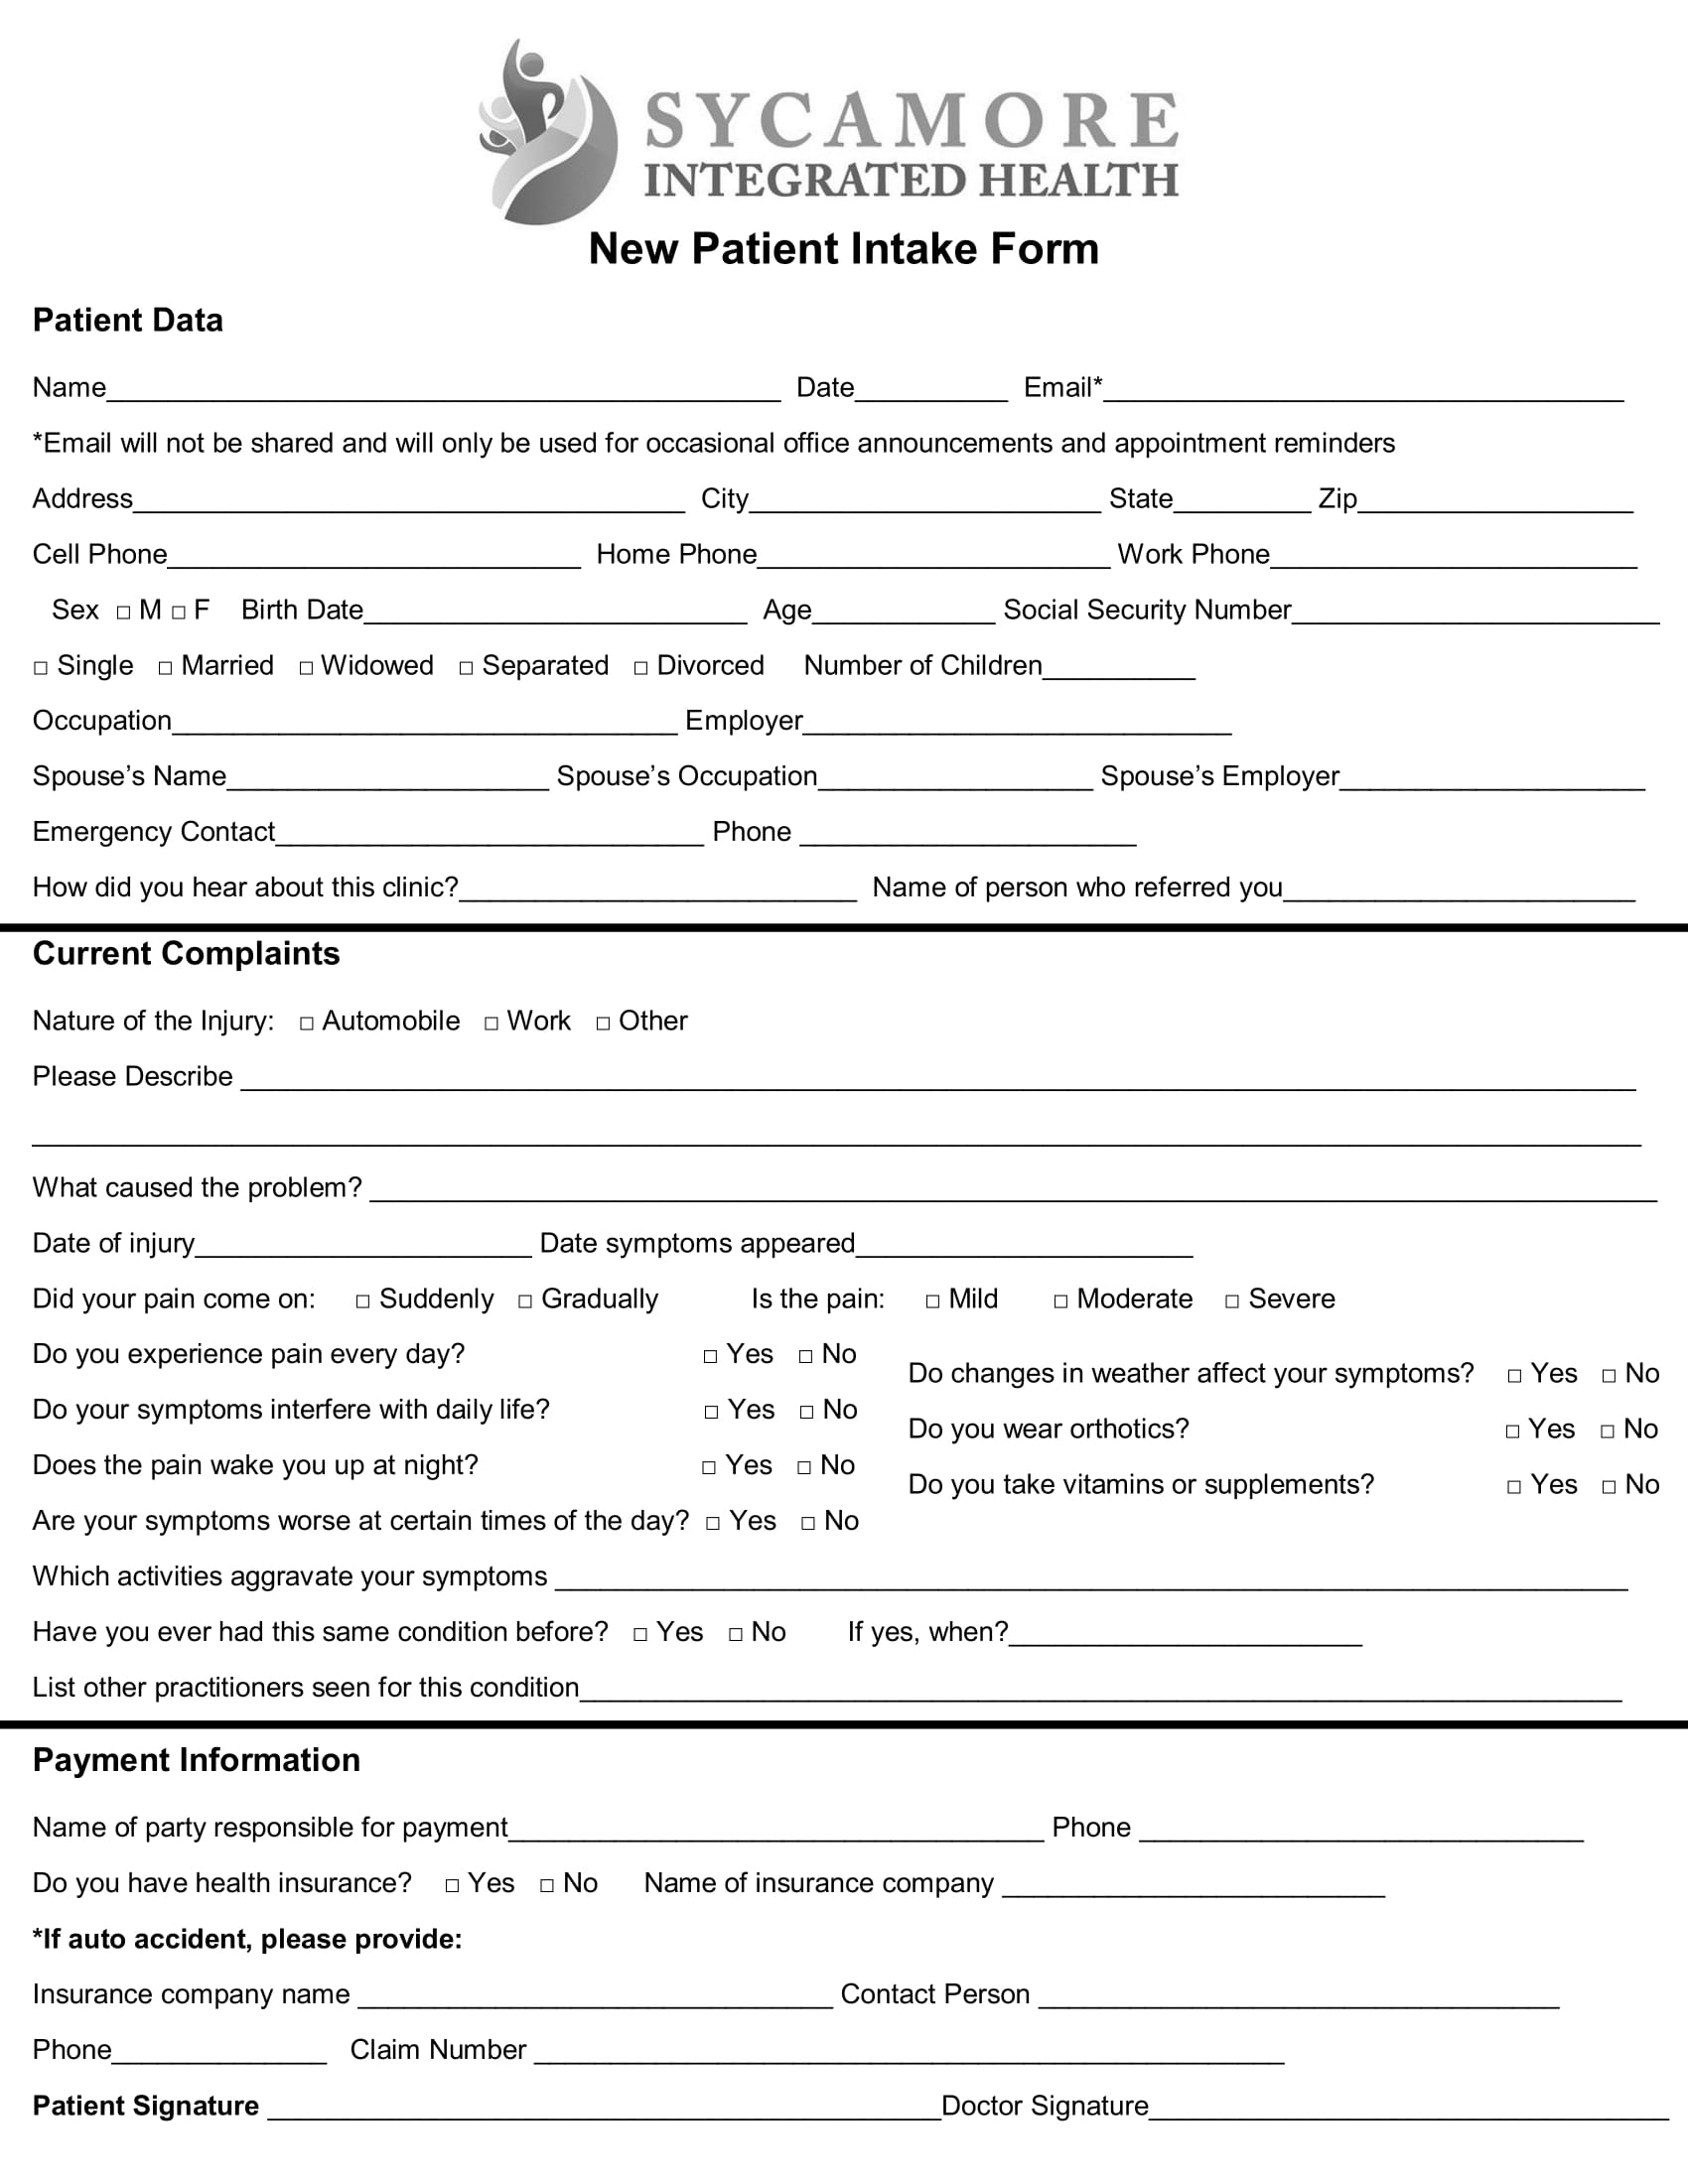 new patient intake form 1